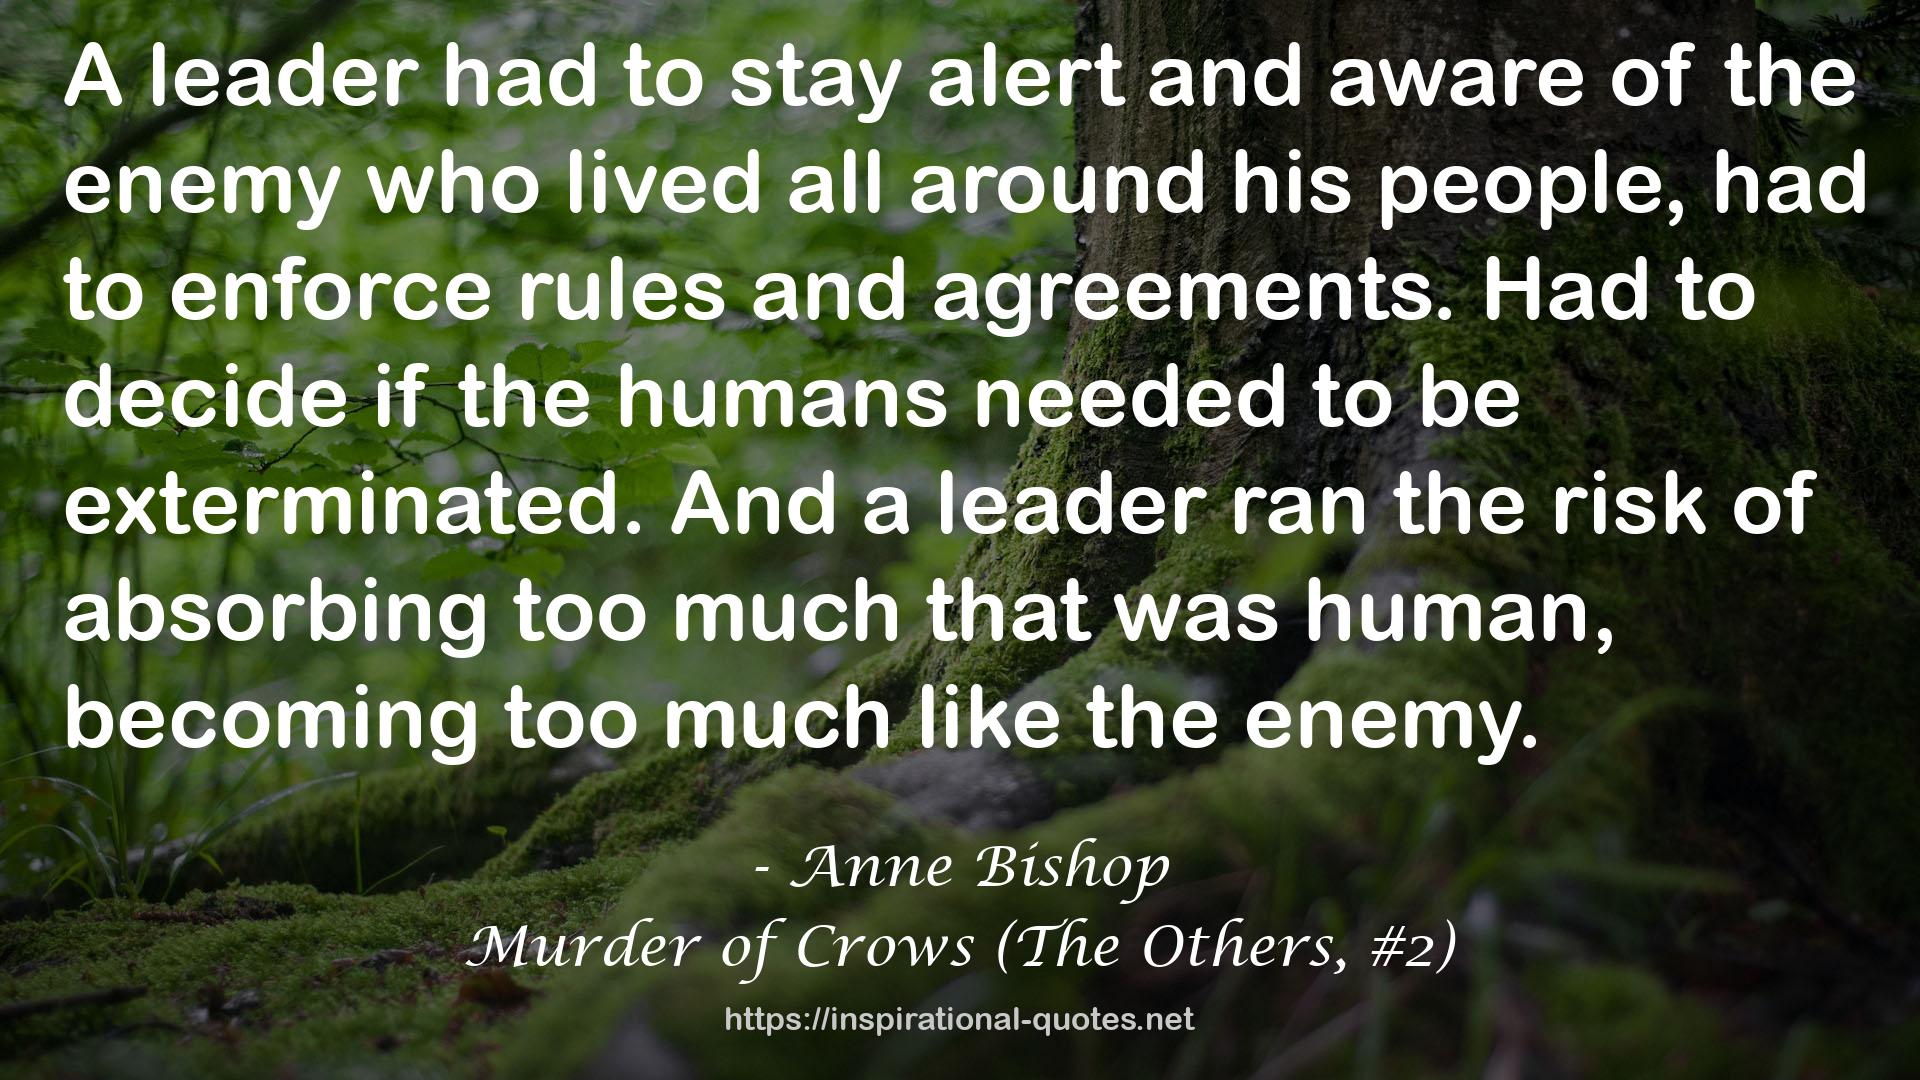 Murder of Crows (The Others, #2) QUOTES